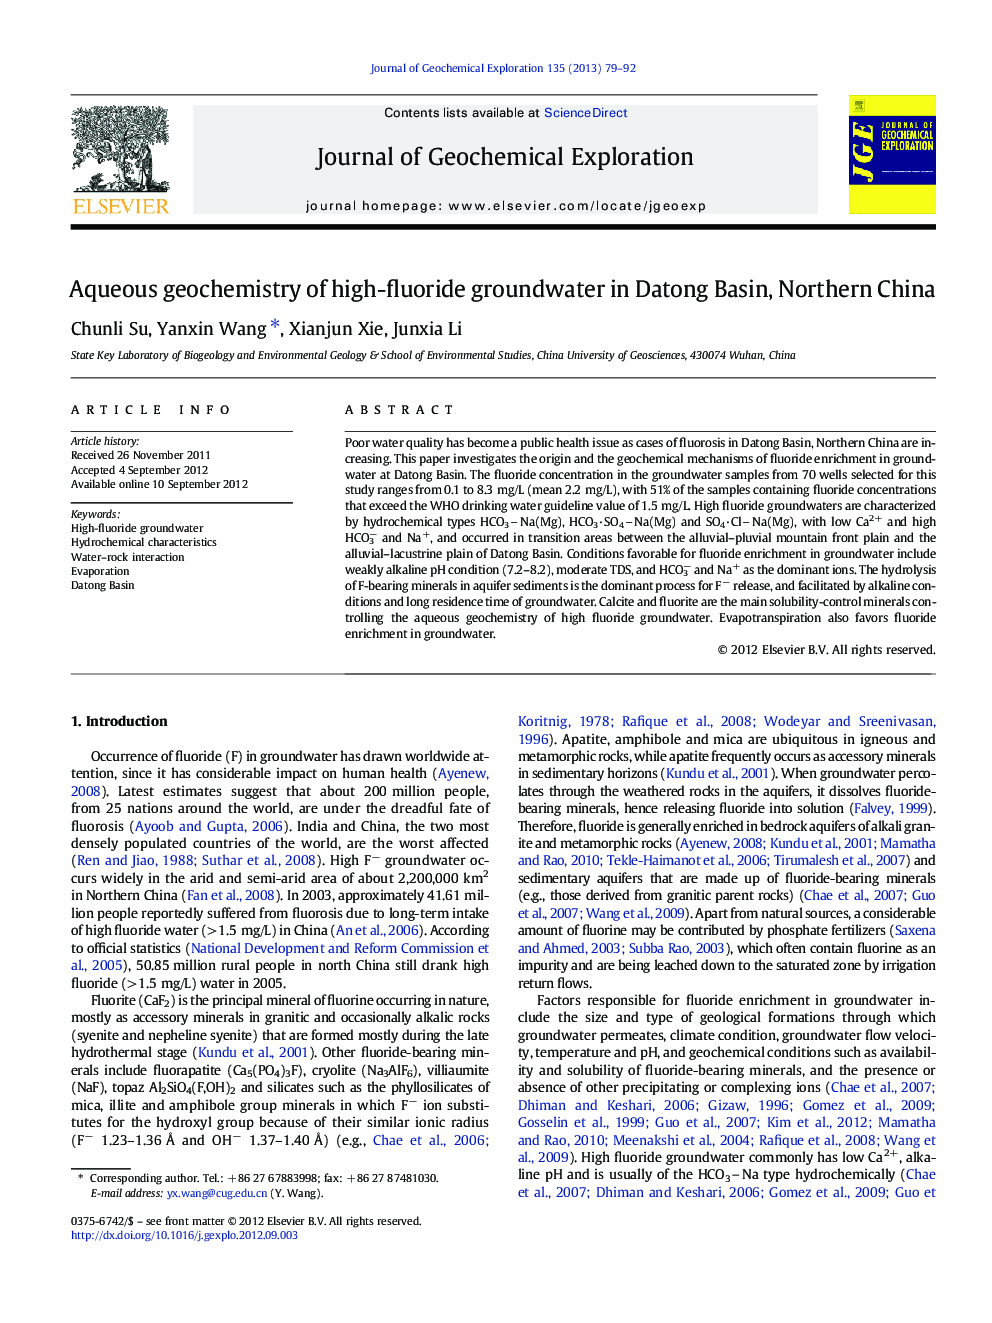 Aqueous geochemistry of high-fluoride groundwater in Datong Basin, Northern China